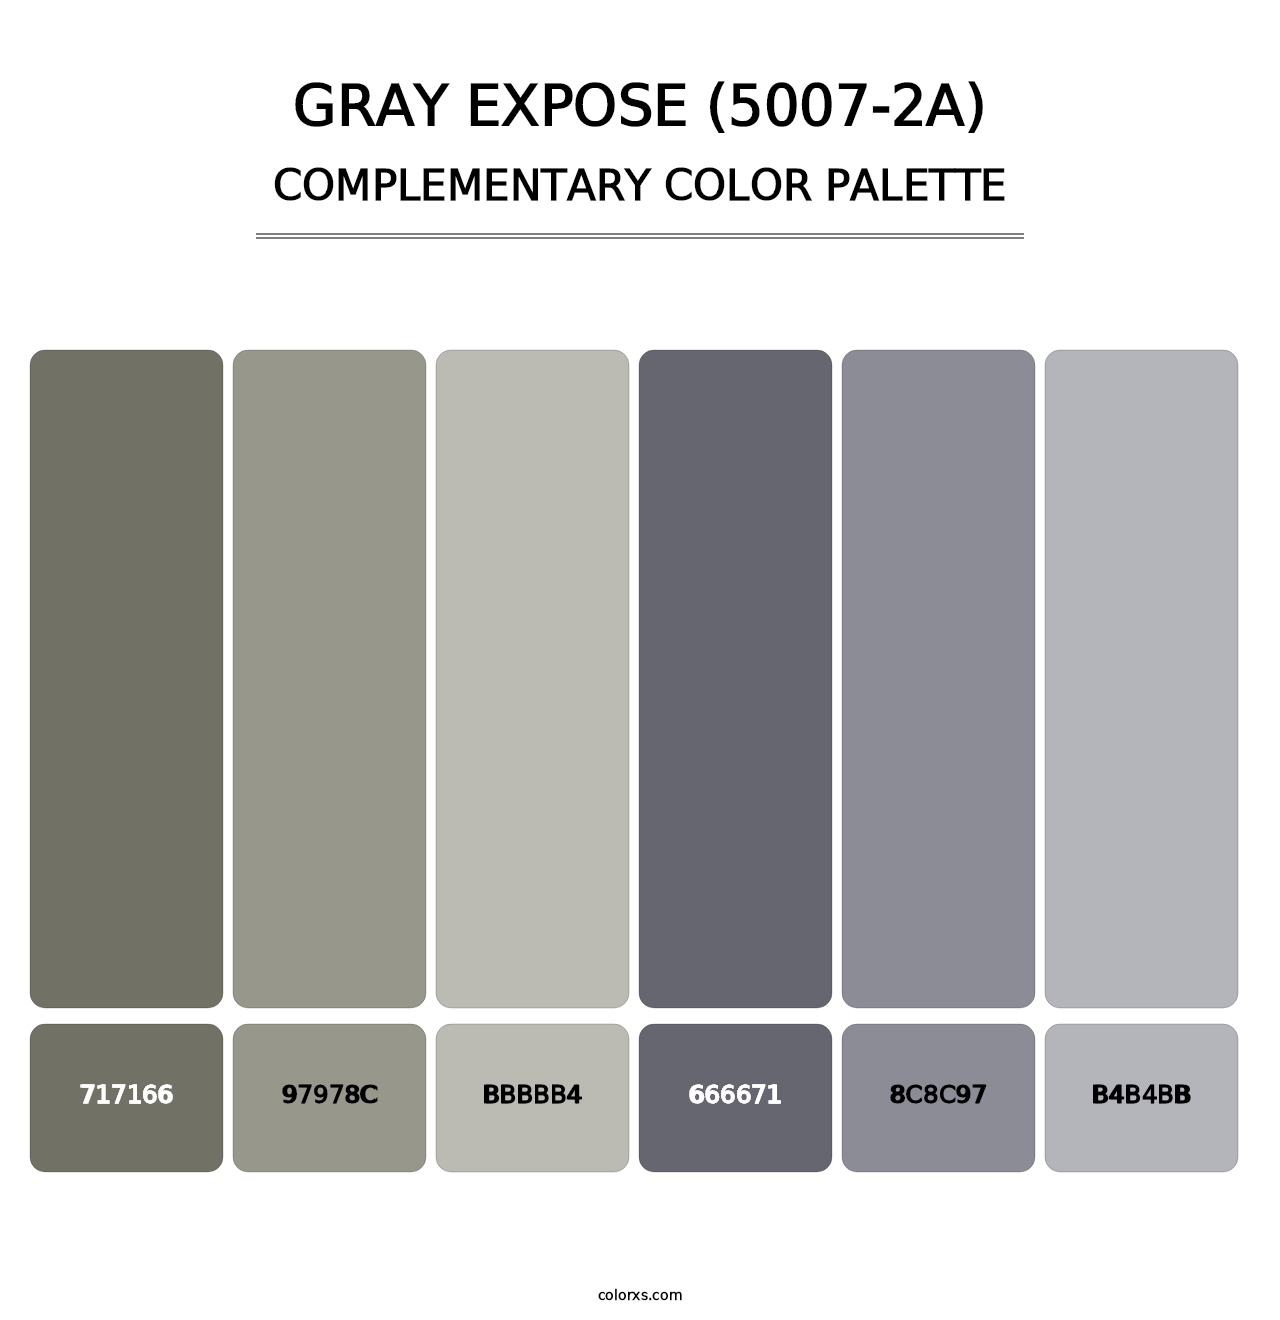 Gray Expose (5007-2A) - Complementary Color Palette